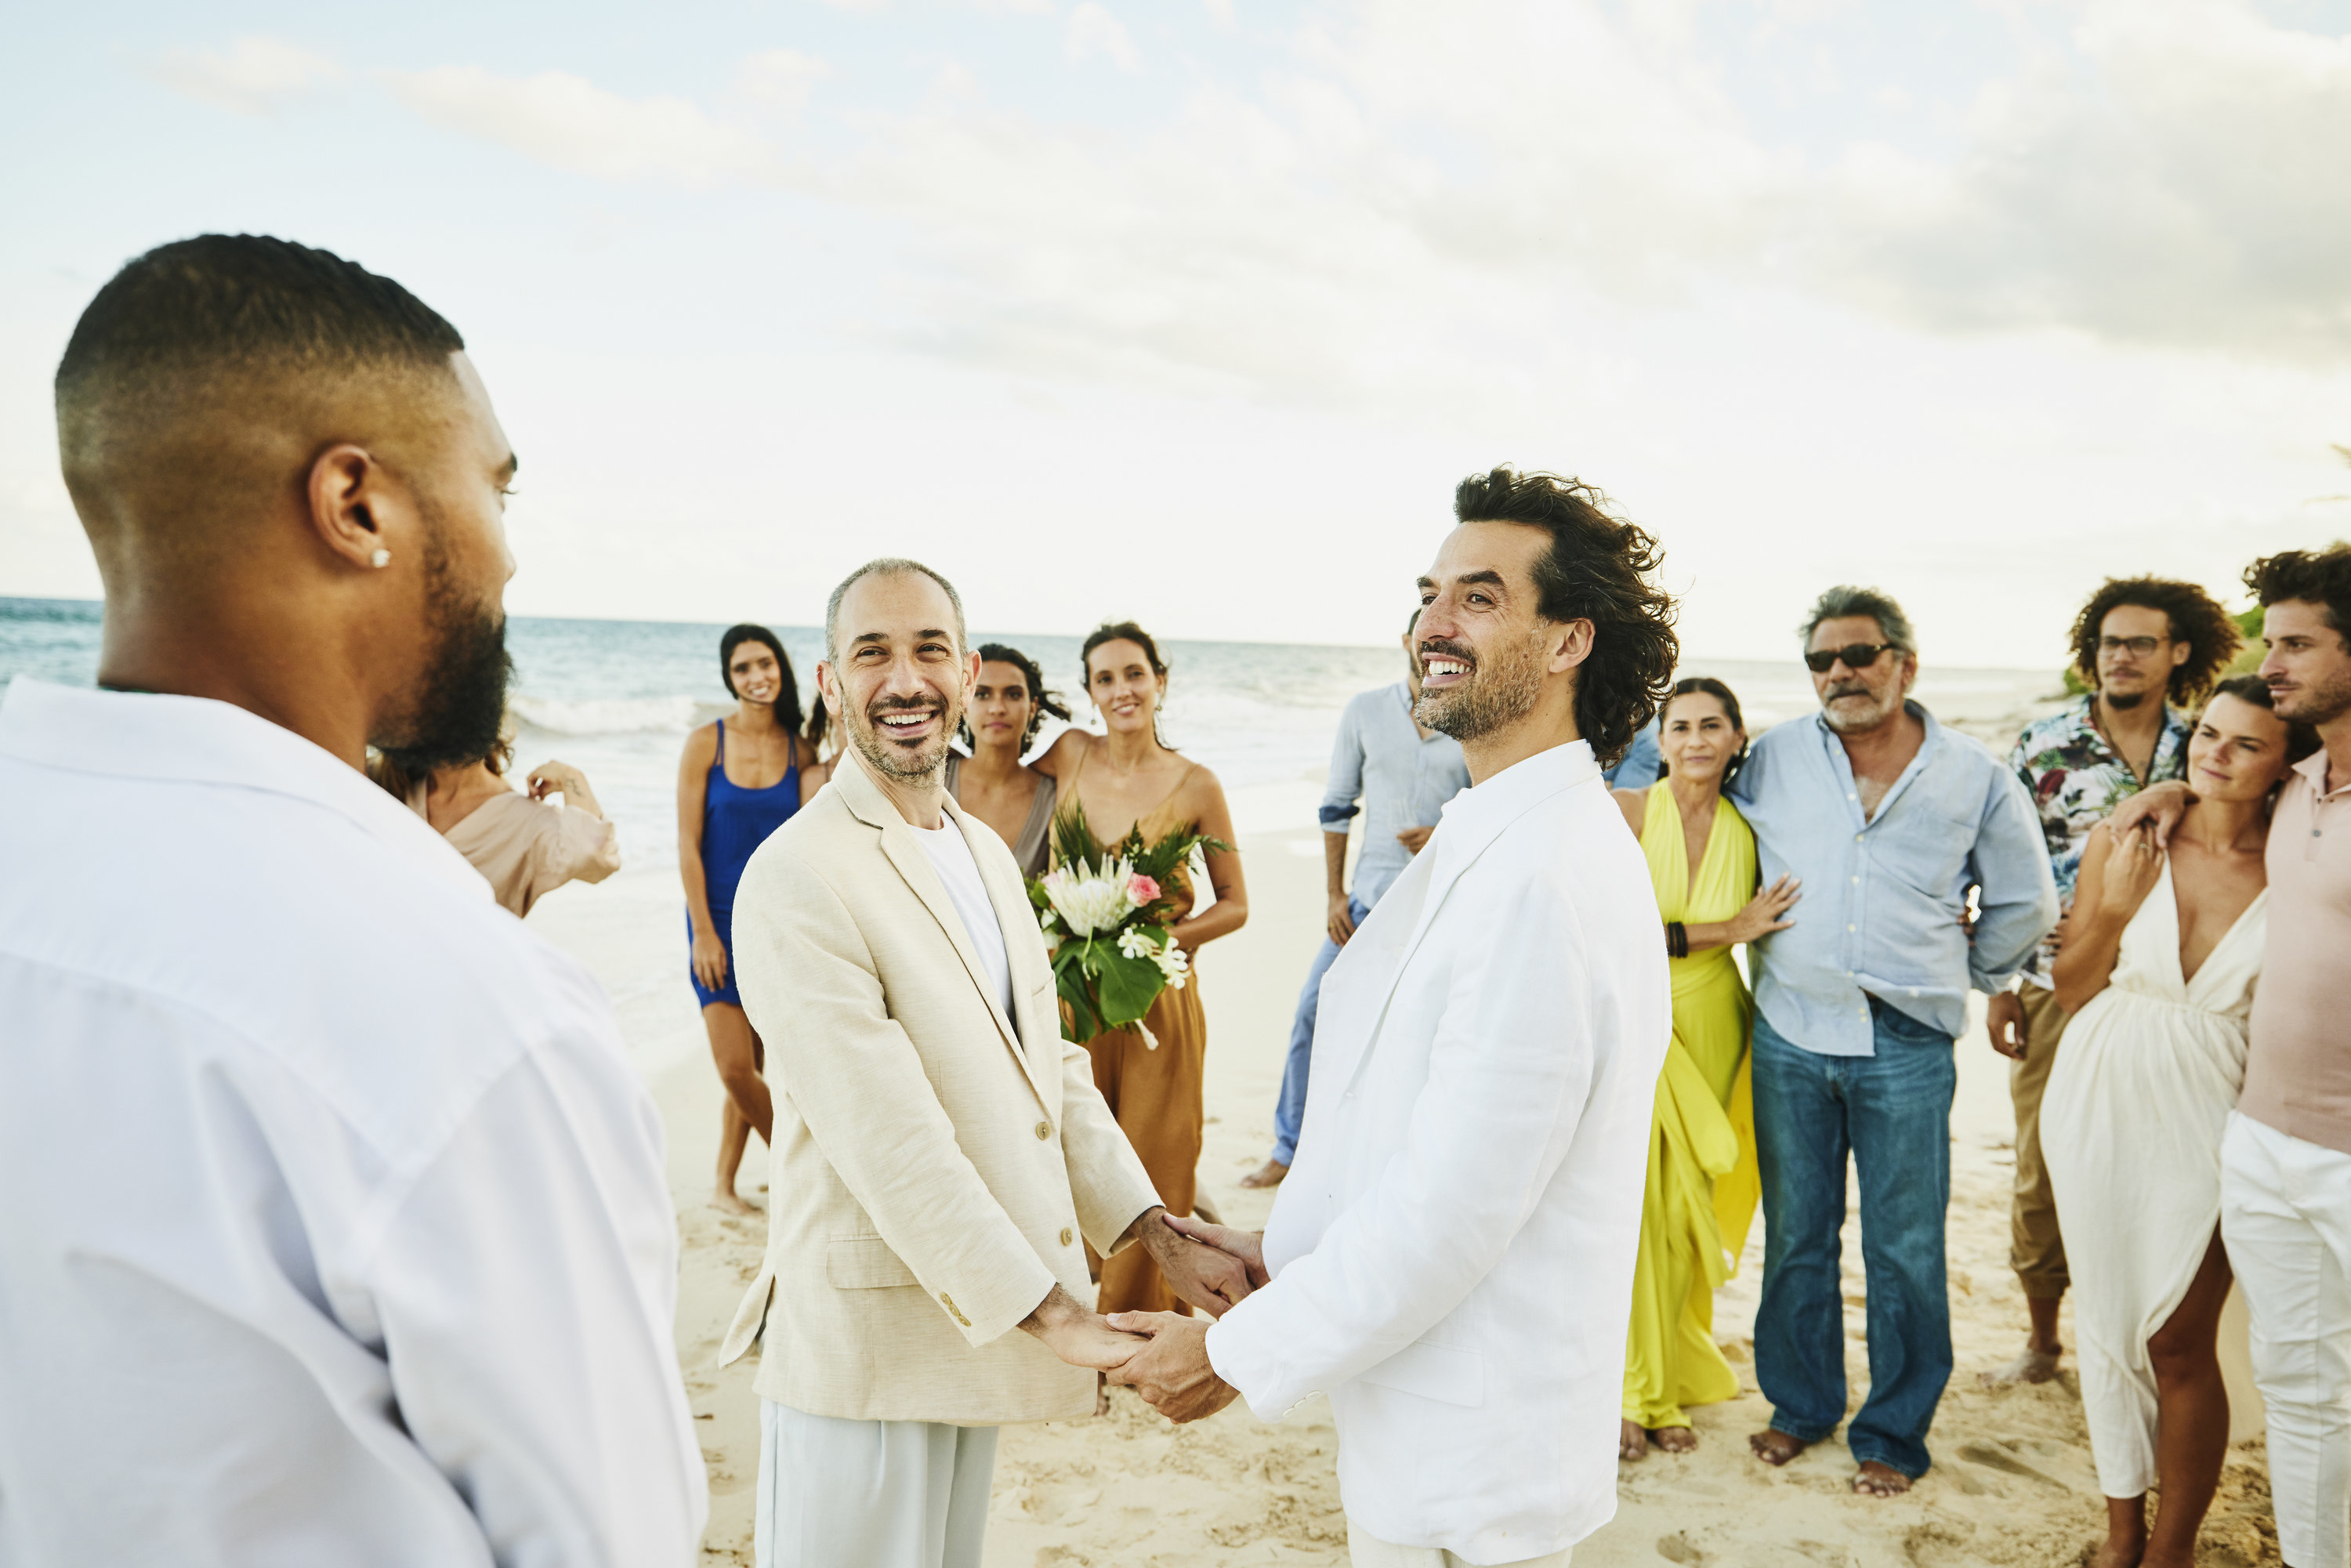 Two men holding hands getting married on the beach